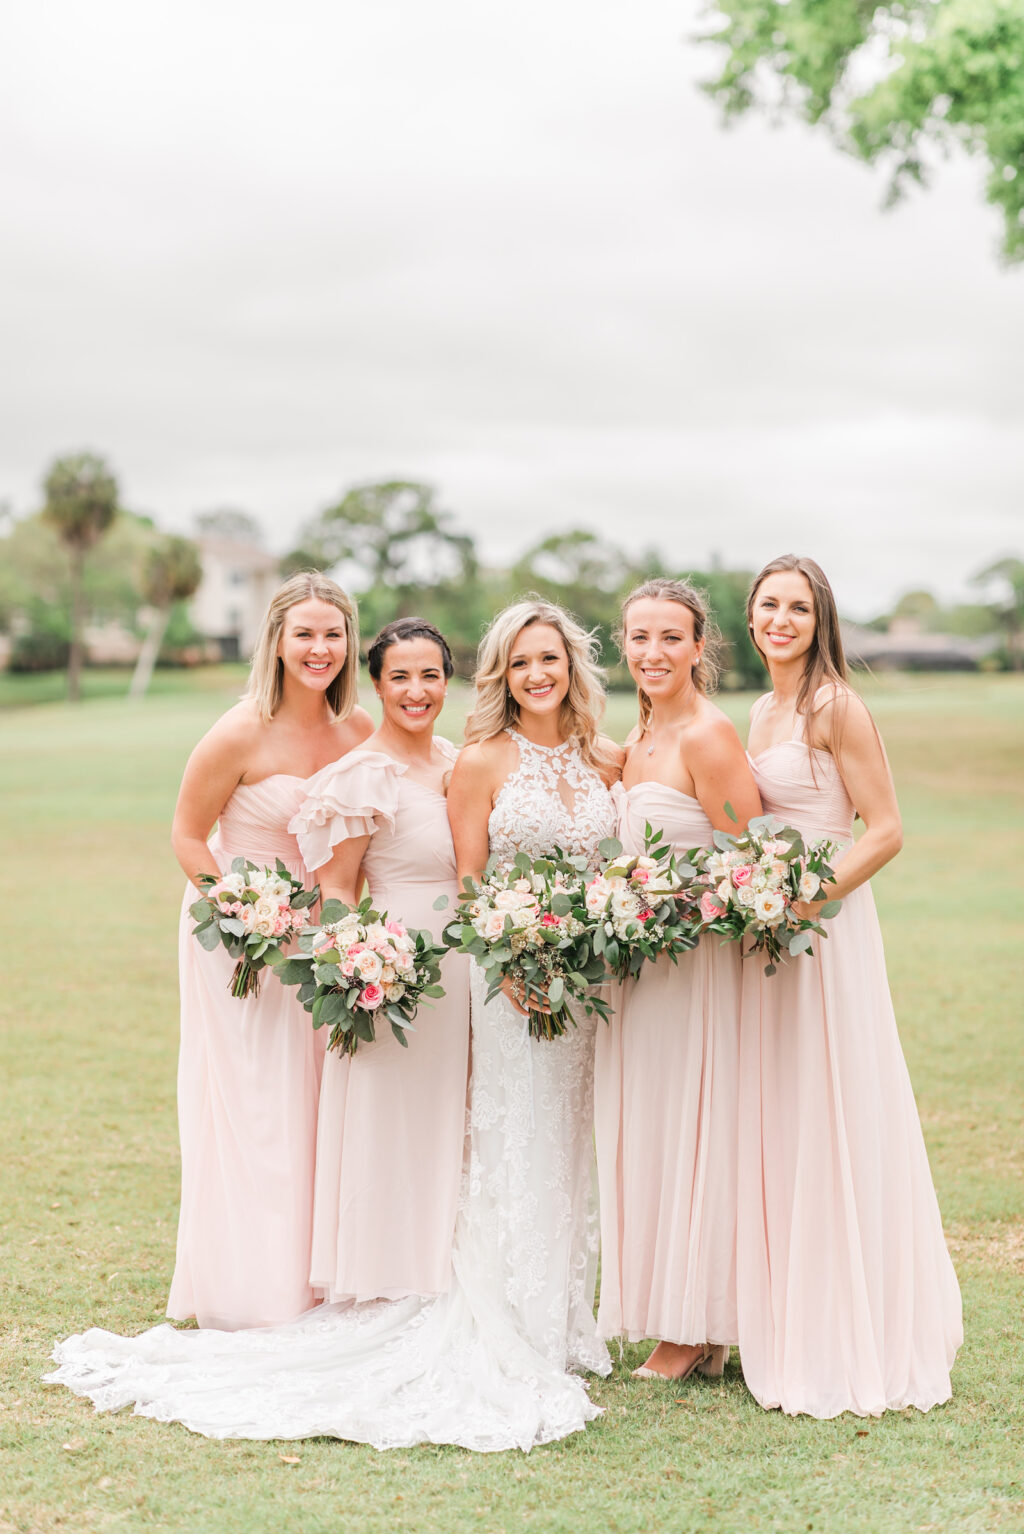 Romantic Pink St. Pete Garden Wedding | Bride Wearing Halter Lace Applique and Illusion Wedding Dress, Bridesmaids in Blush Pink Mix and Match Dresses Holding Floral Bouquets | Tampa Bay Wedding Florist Brides N Blooms Designs